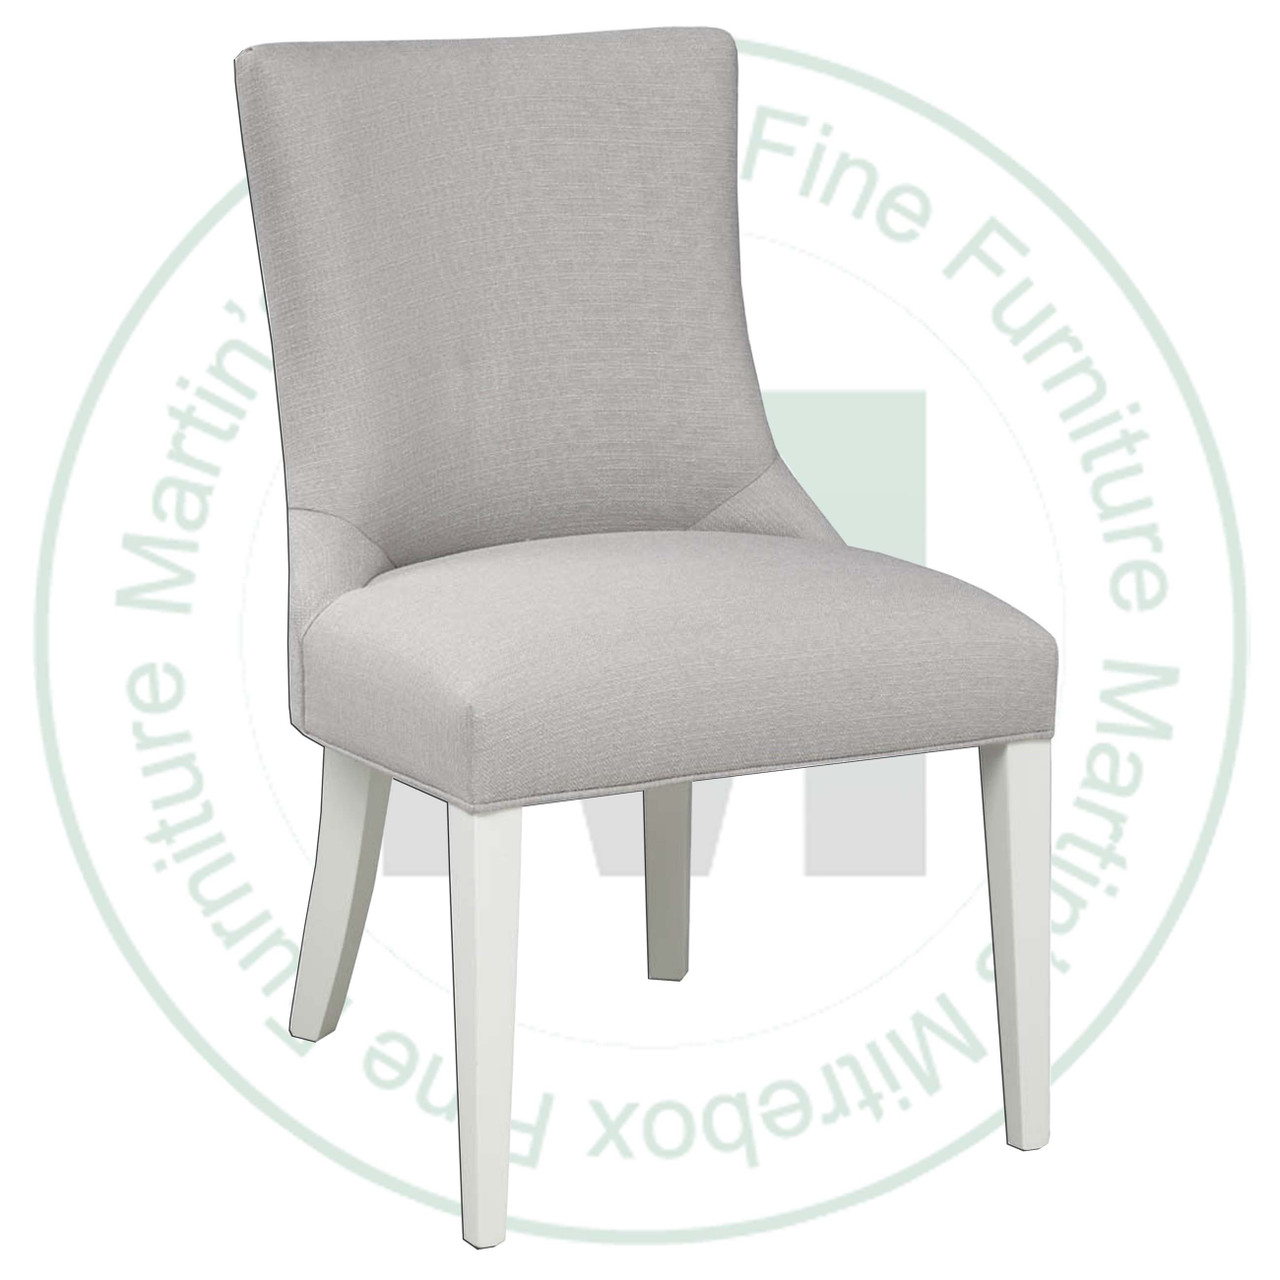 Maple Kolding Side Chair With Leather Seat And Back